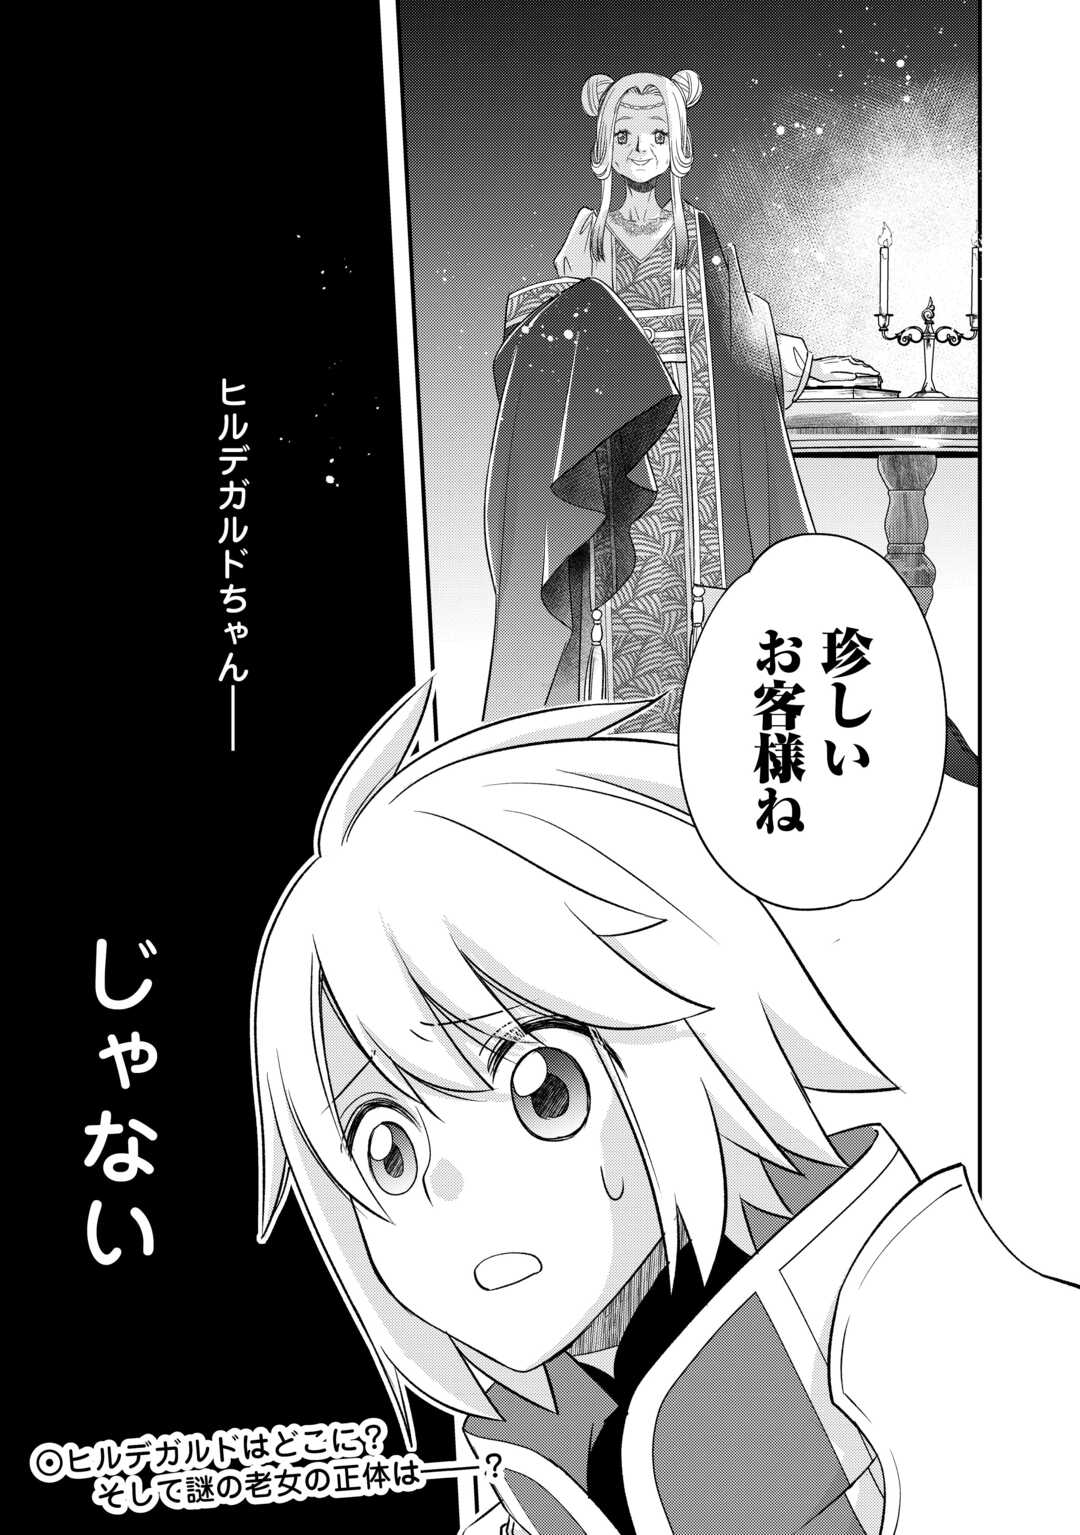 Kanchigai no Atelier Meister - Chapter 43 - Page 24